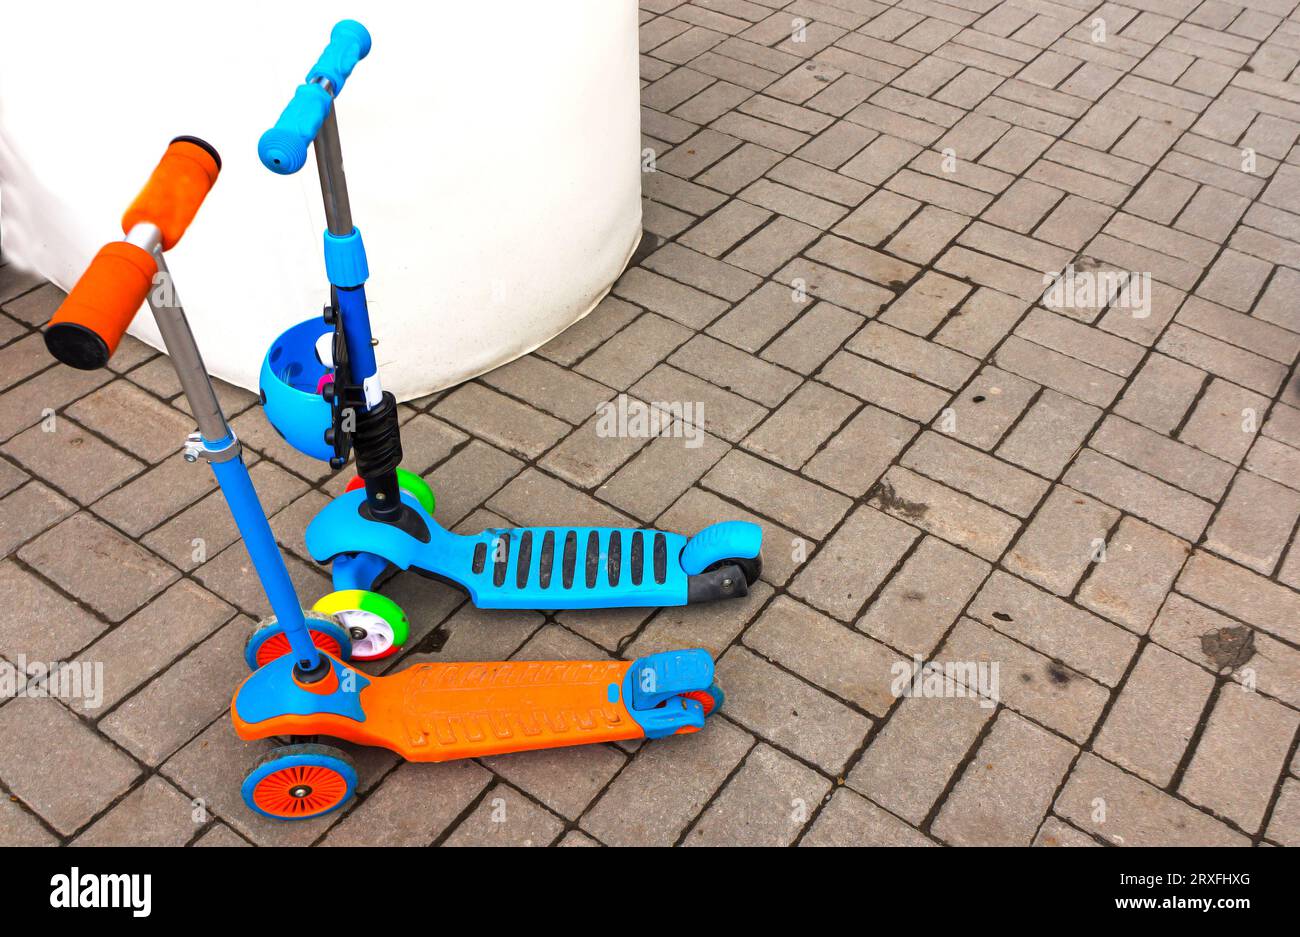 Children's scooters of different colors.The concept the childhood, walking transport for children. Stock Photo